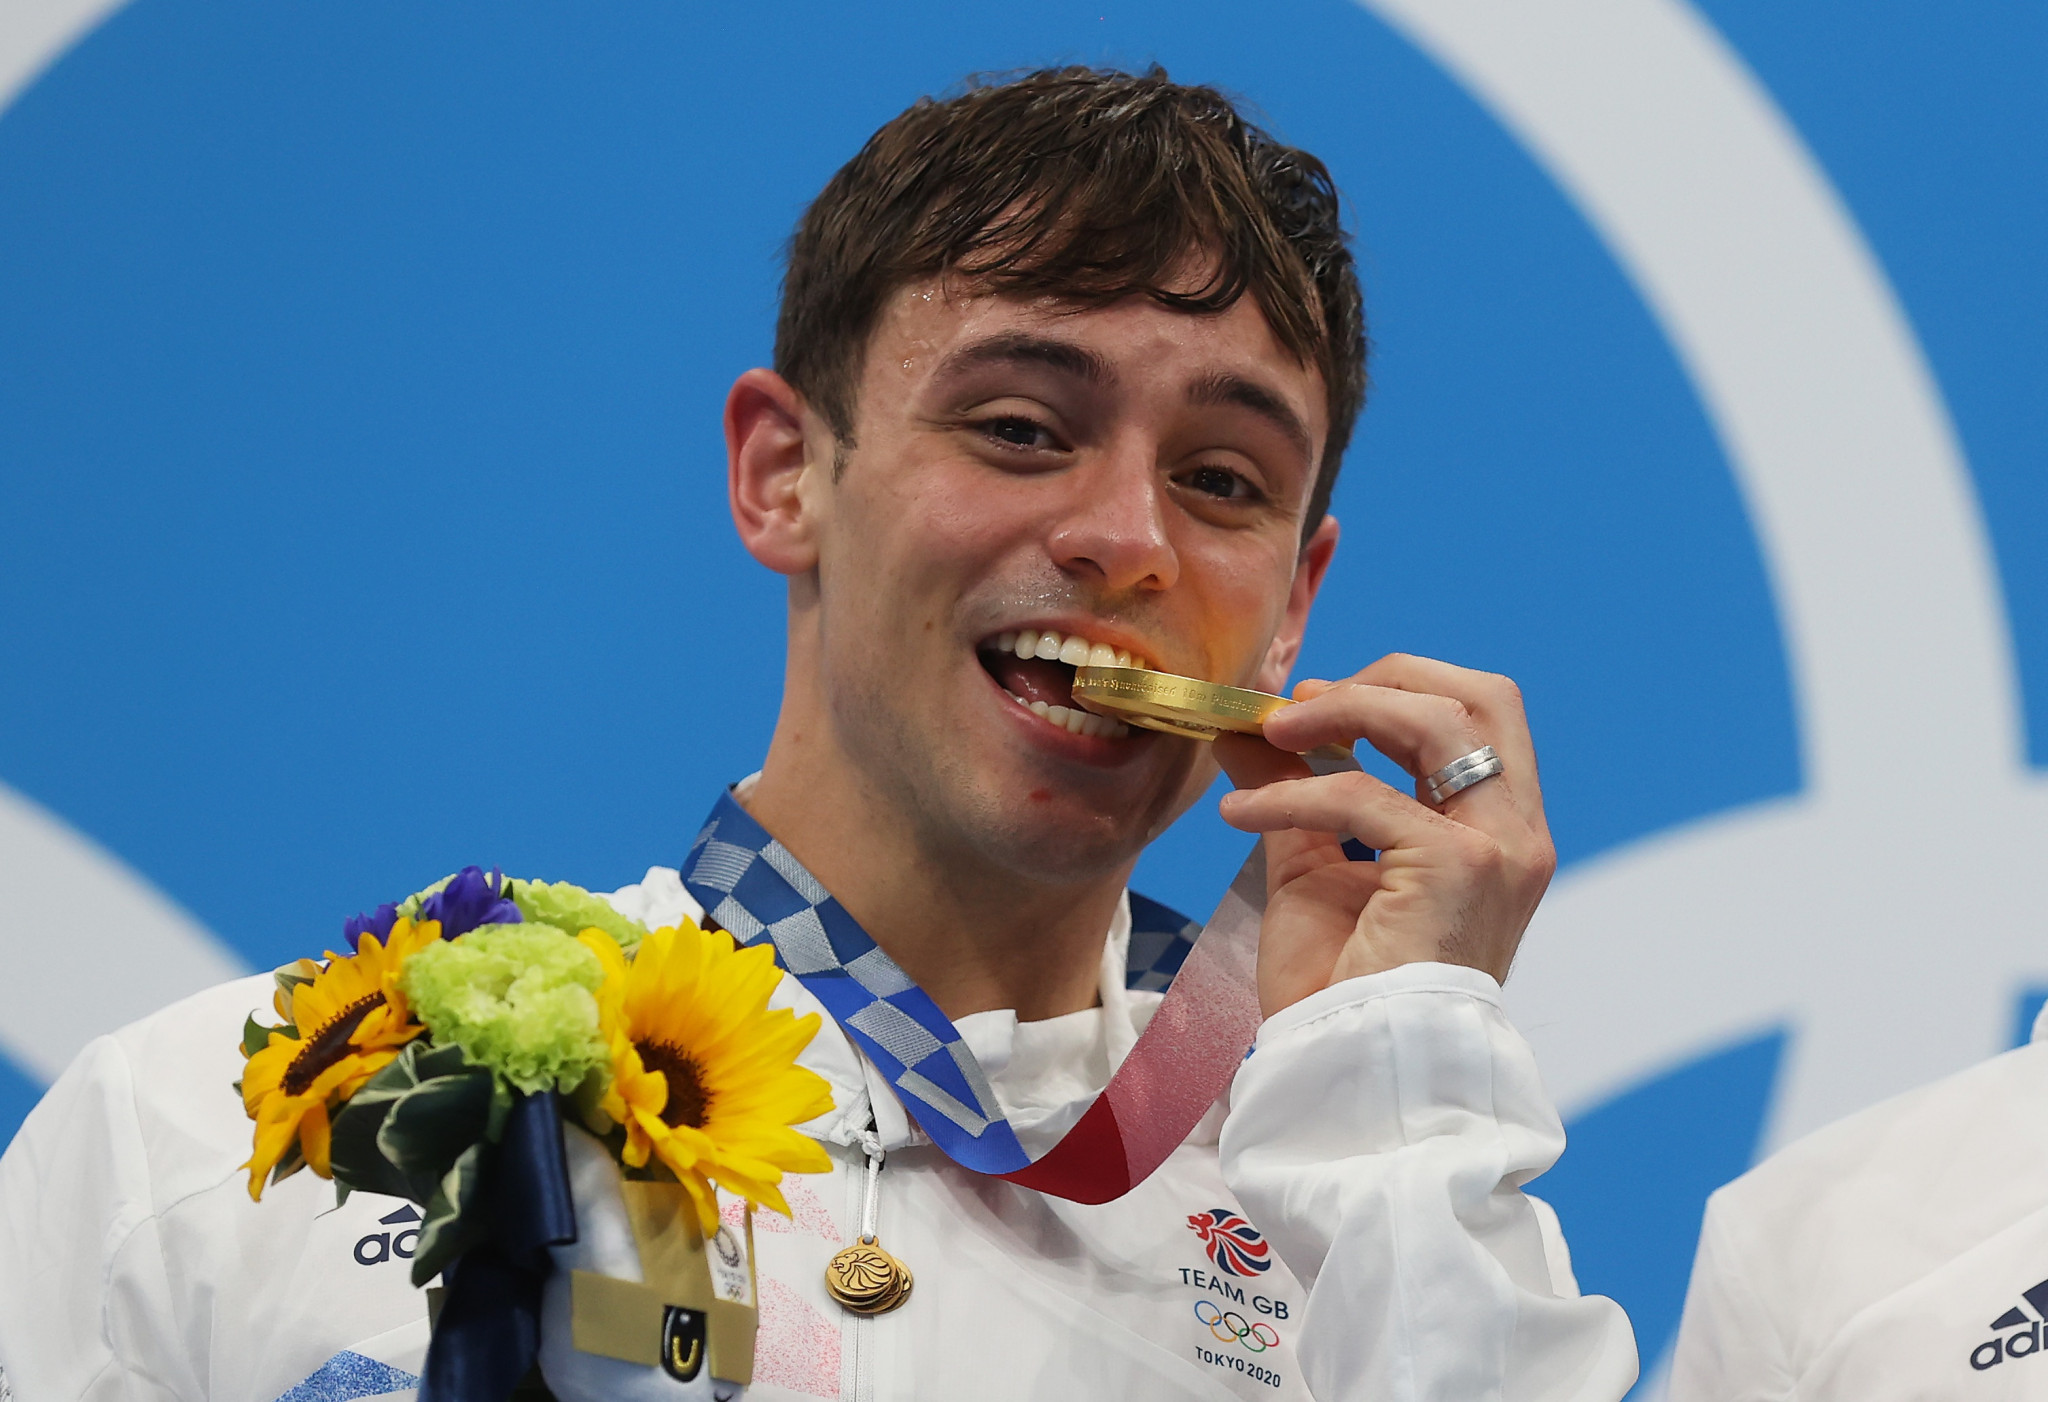 Tom Daley has revealed that he spent 10 hours in hospital after contracting COVID-19 in January ©Getty Images